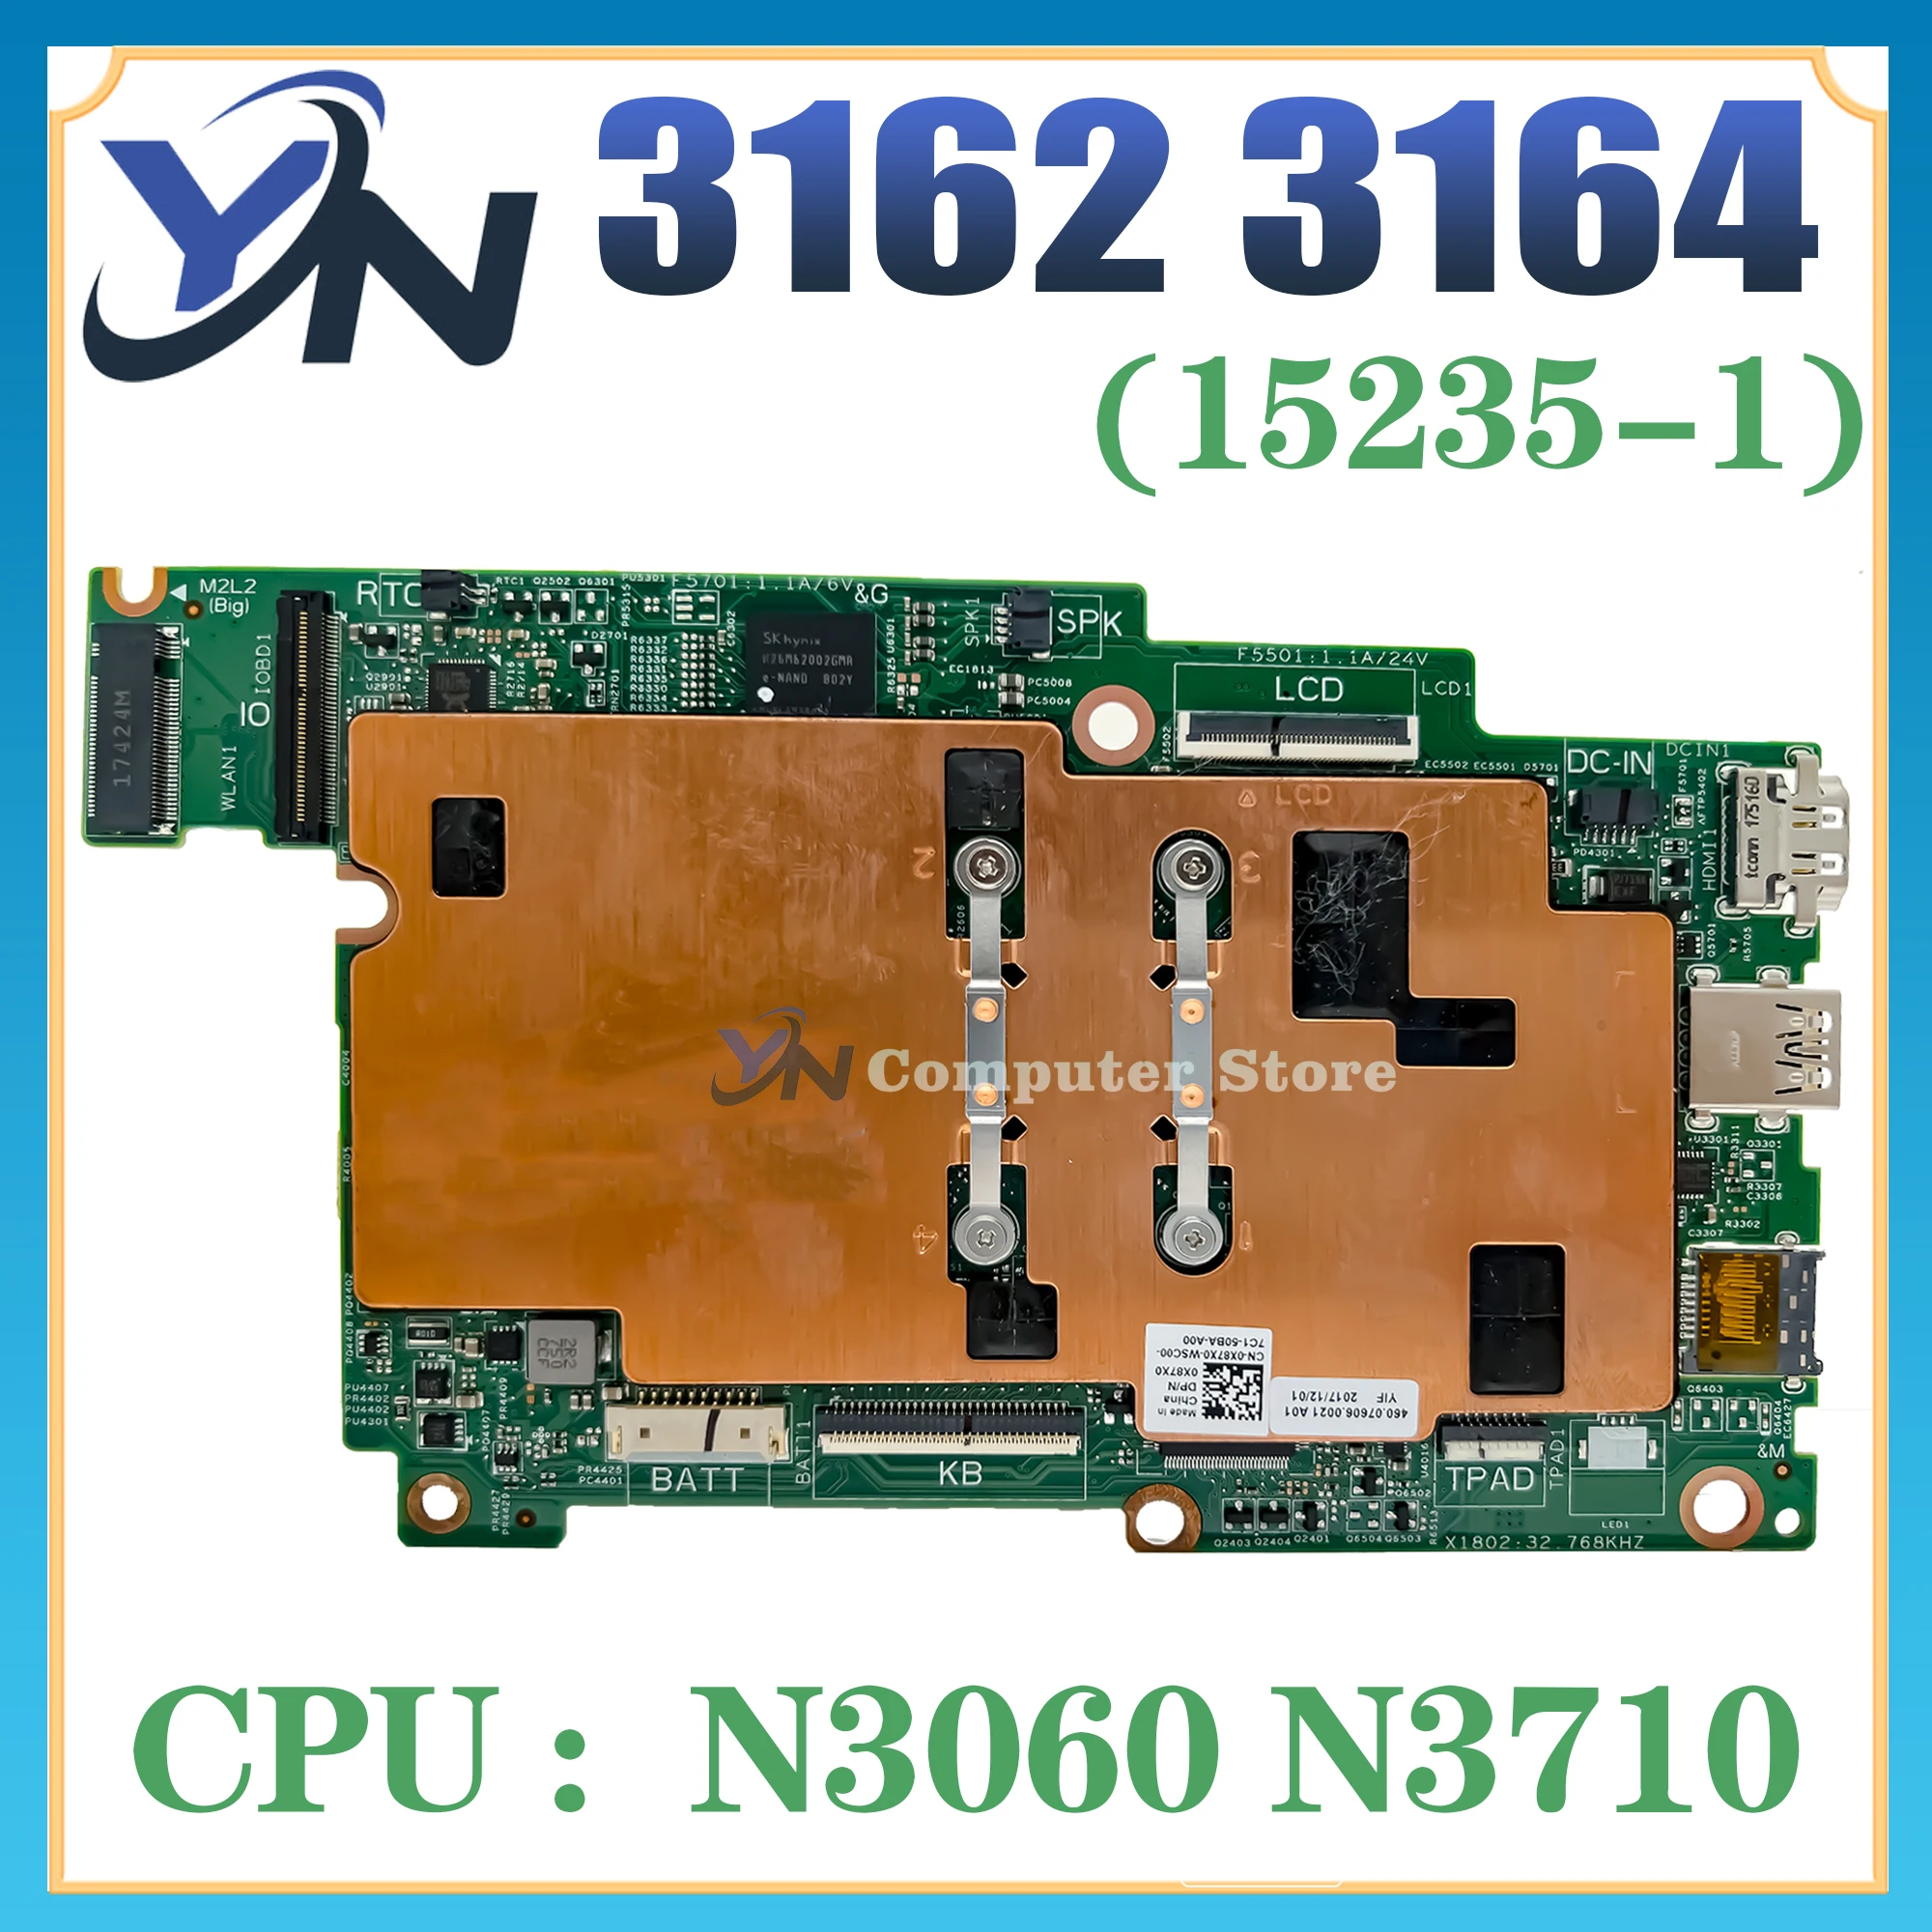 

15235-1 Mainboard For Dell Inspiron 11 3162 3164 Laptop Motherboard CPU N3060 N3710 RAM-2GB/4GB SSD-32G 100% TEST OK